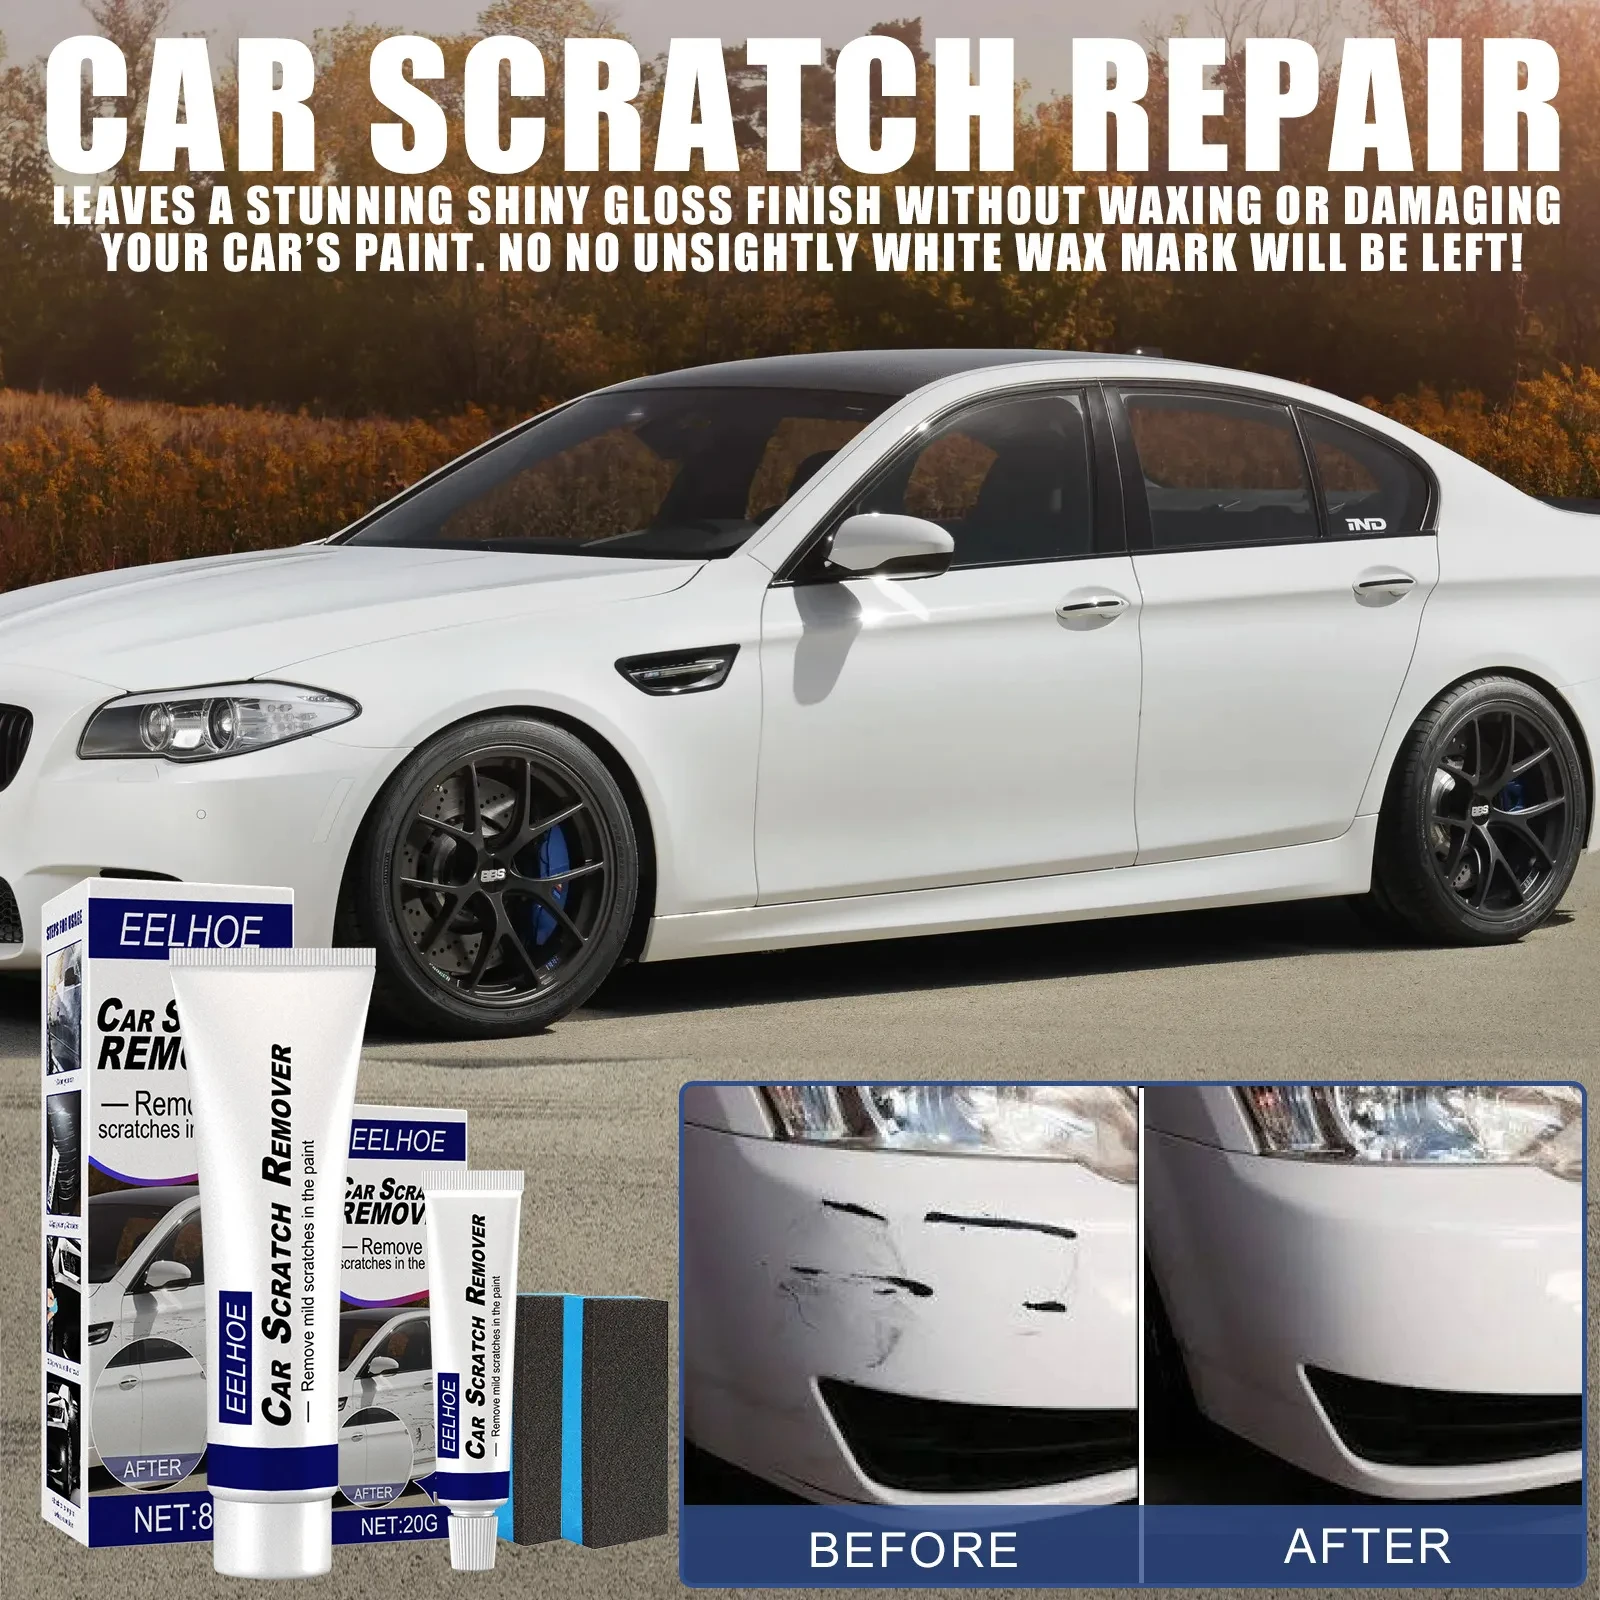 Car Auto Scratches Repair Wax Scratch Remove Reapir kit Paint Care Wax  Polishing Car Paste Polish Cleaning Tools For Car Styling - AliExpress